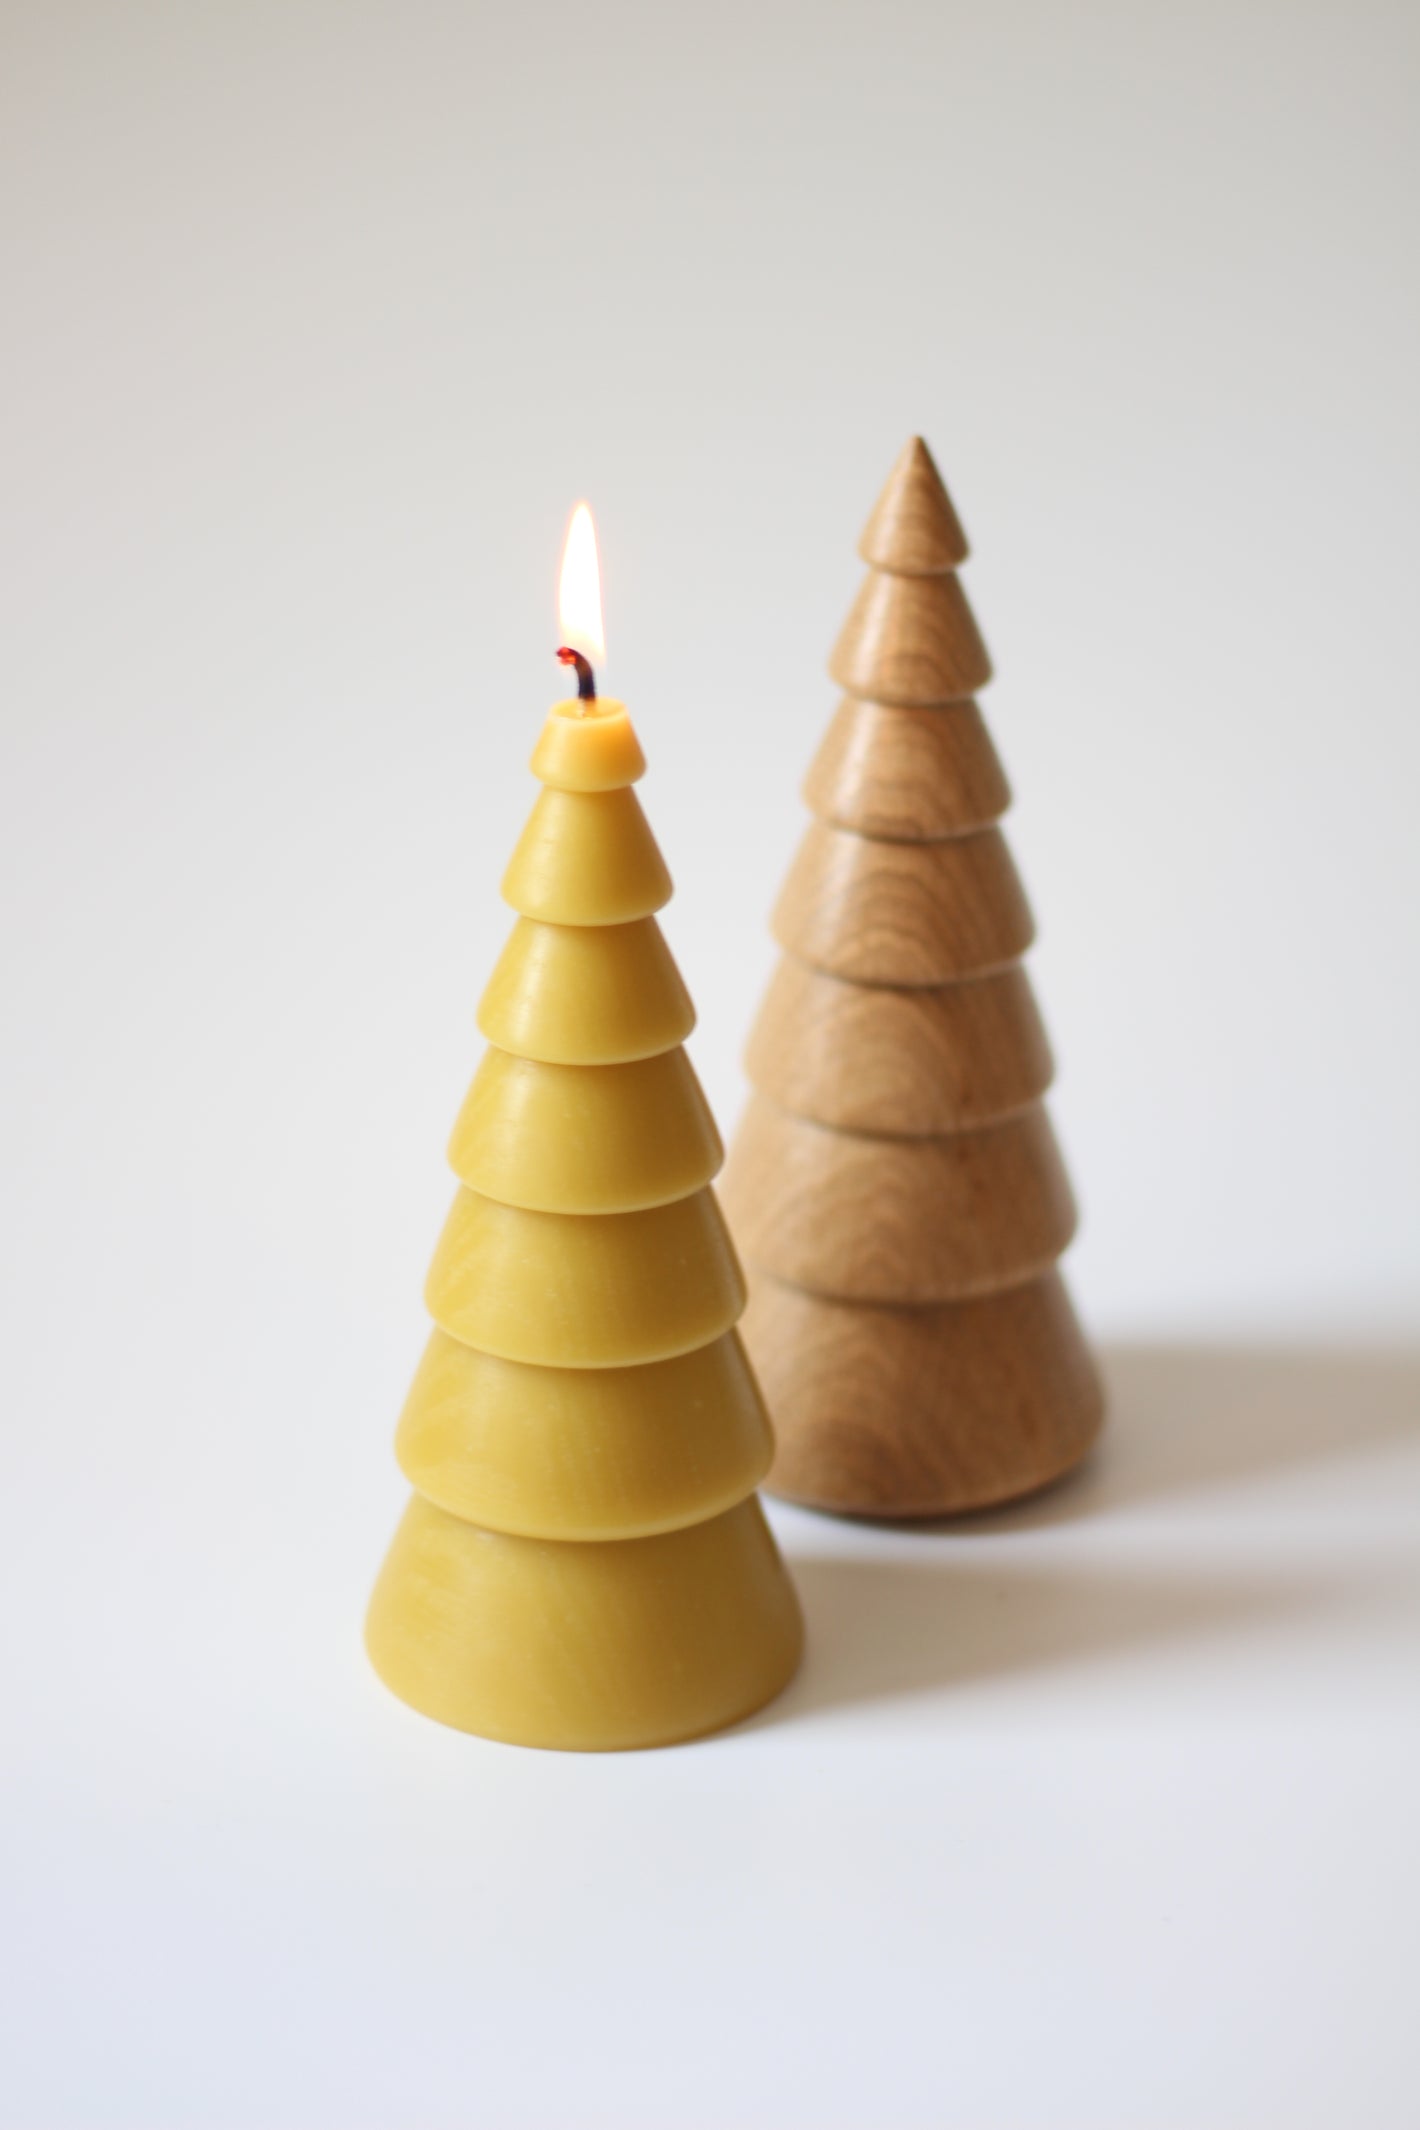 bespoke candle from a wooden carved sculpture